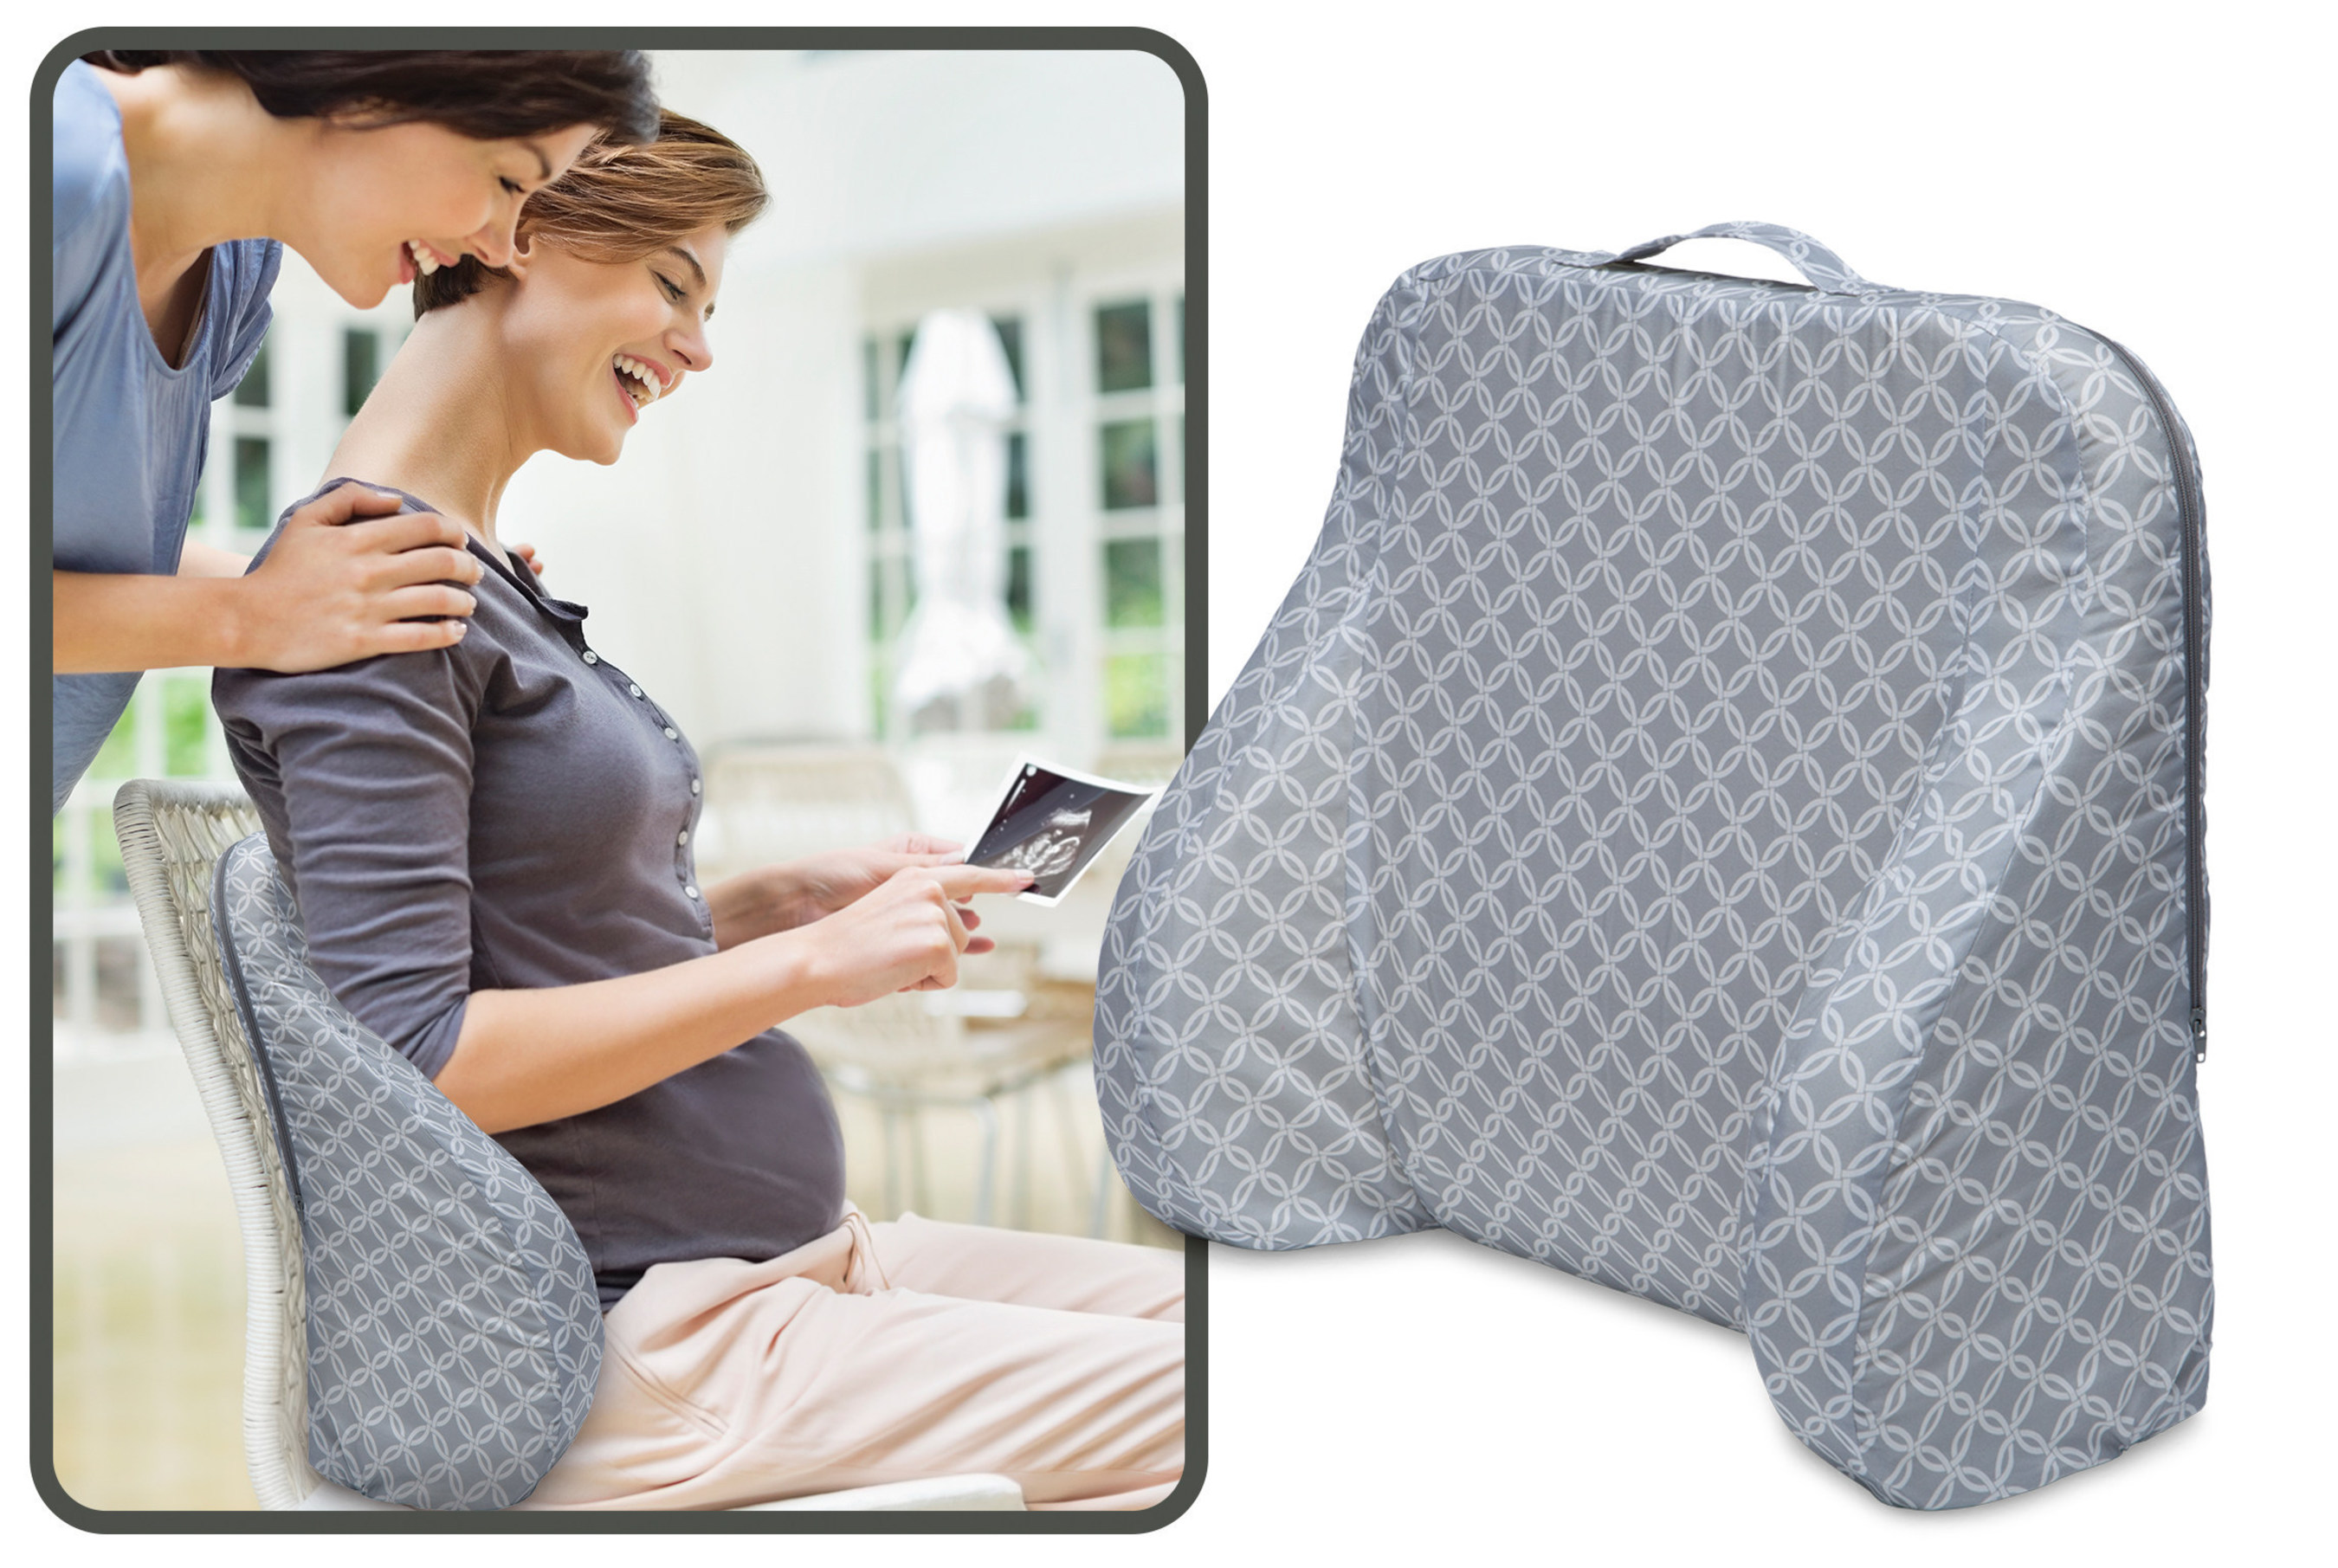 Boppy(R) Pregnancy Back Rest - The firm back rest provides contoured lumbar support and is designed to reduce the stress and strain associated with sitting all day.